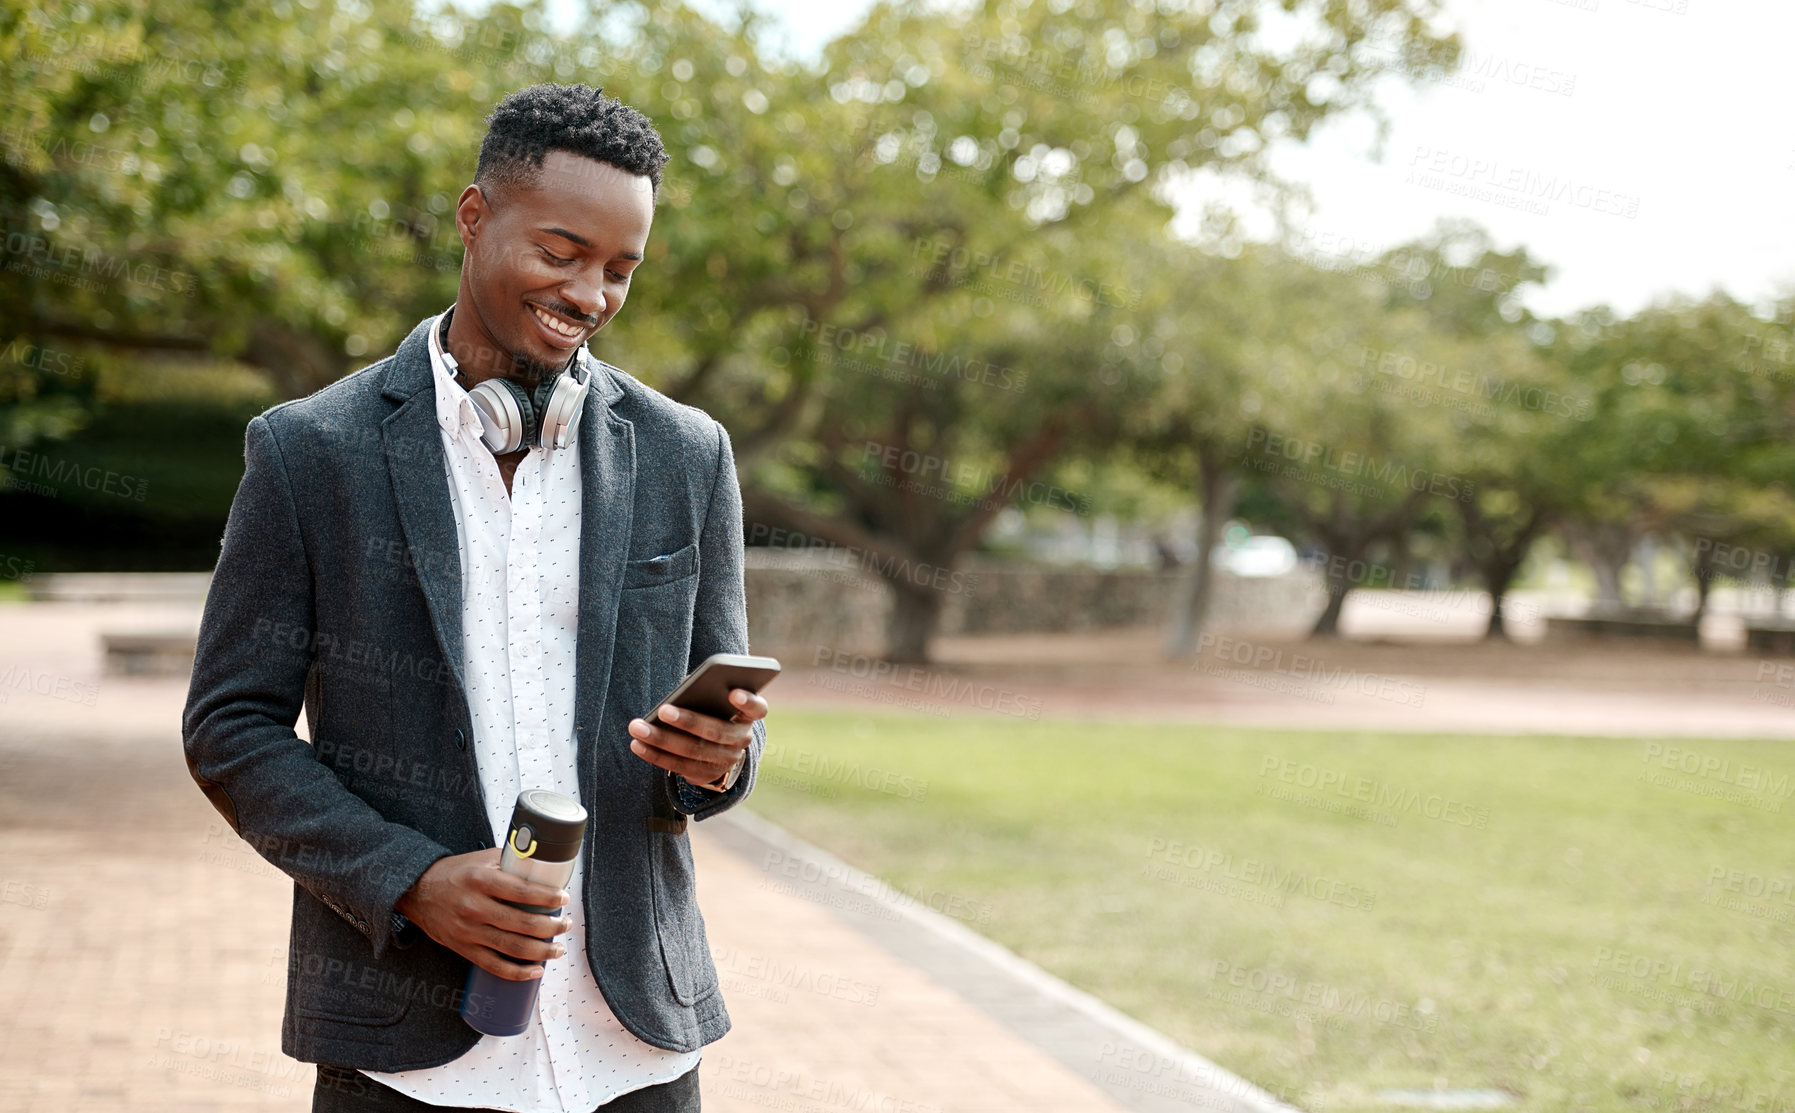 Buy stock photo Young, cool smiling businessman on a phone having a walk in the park outside in nature. Happy man texting, chatting or reading messages on a smartphone outdoors on a break from work, over copy space.